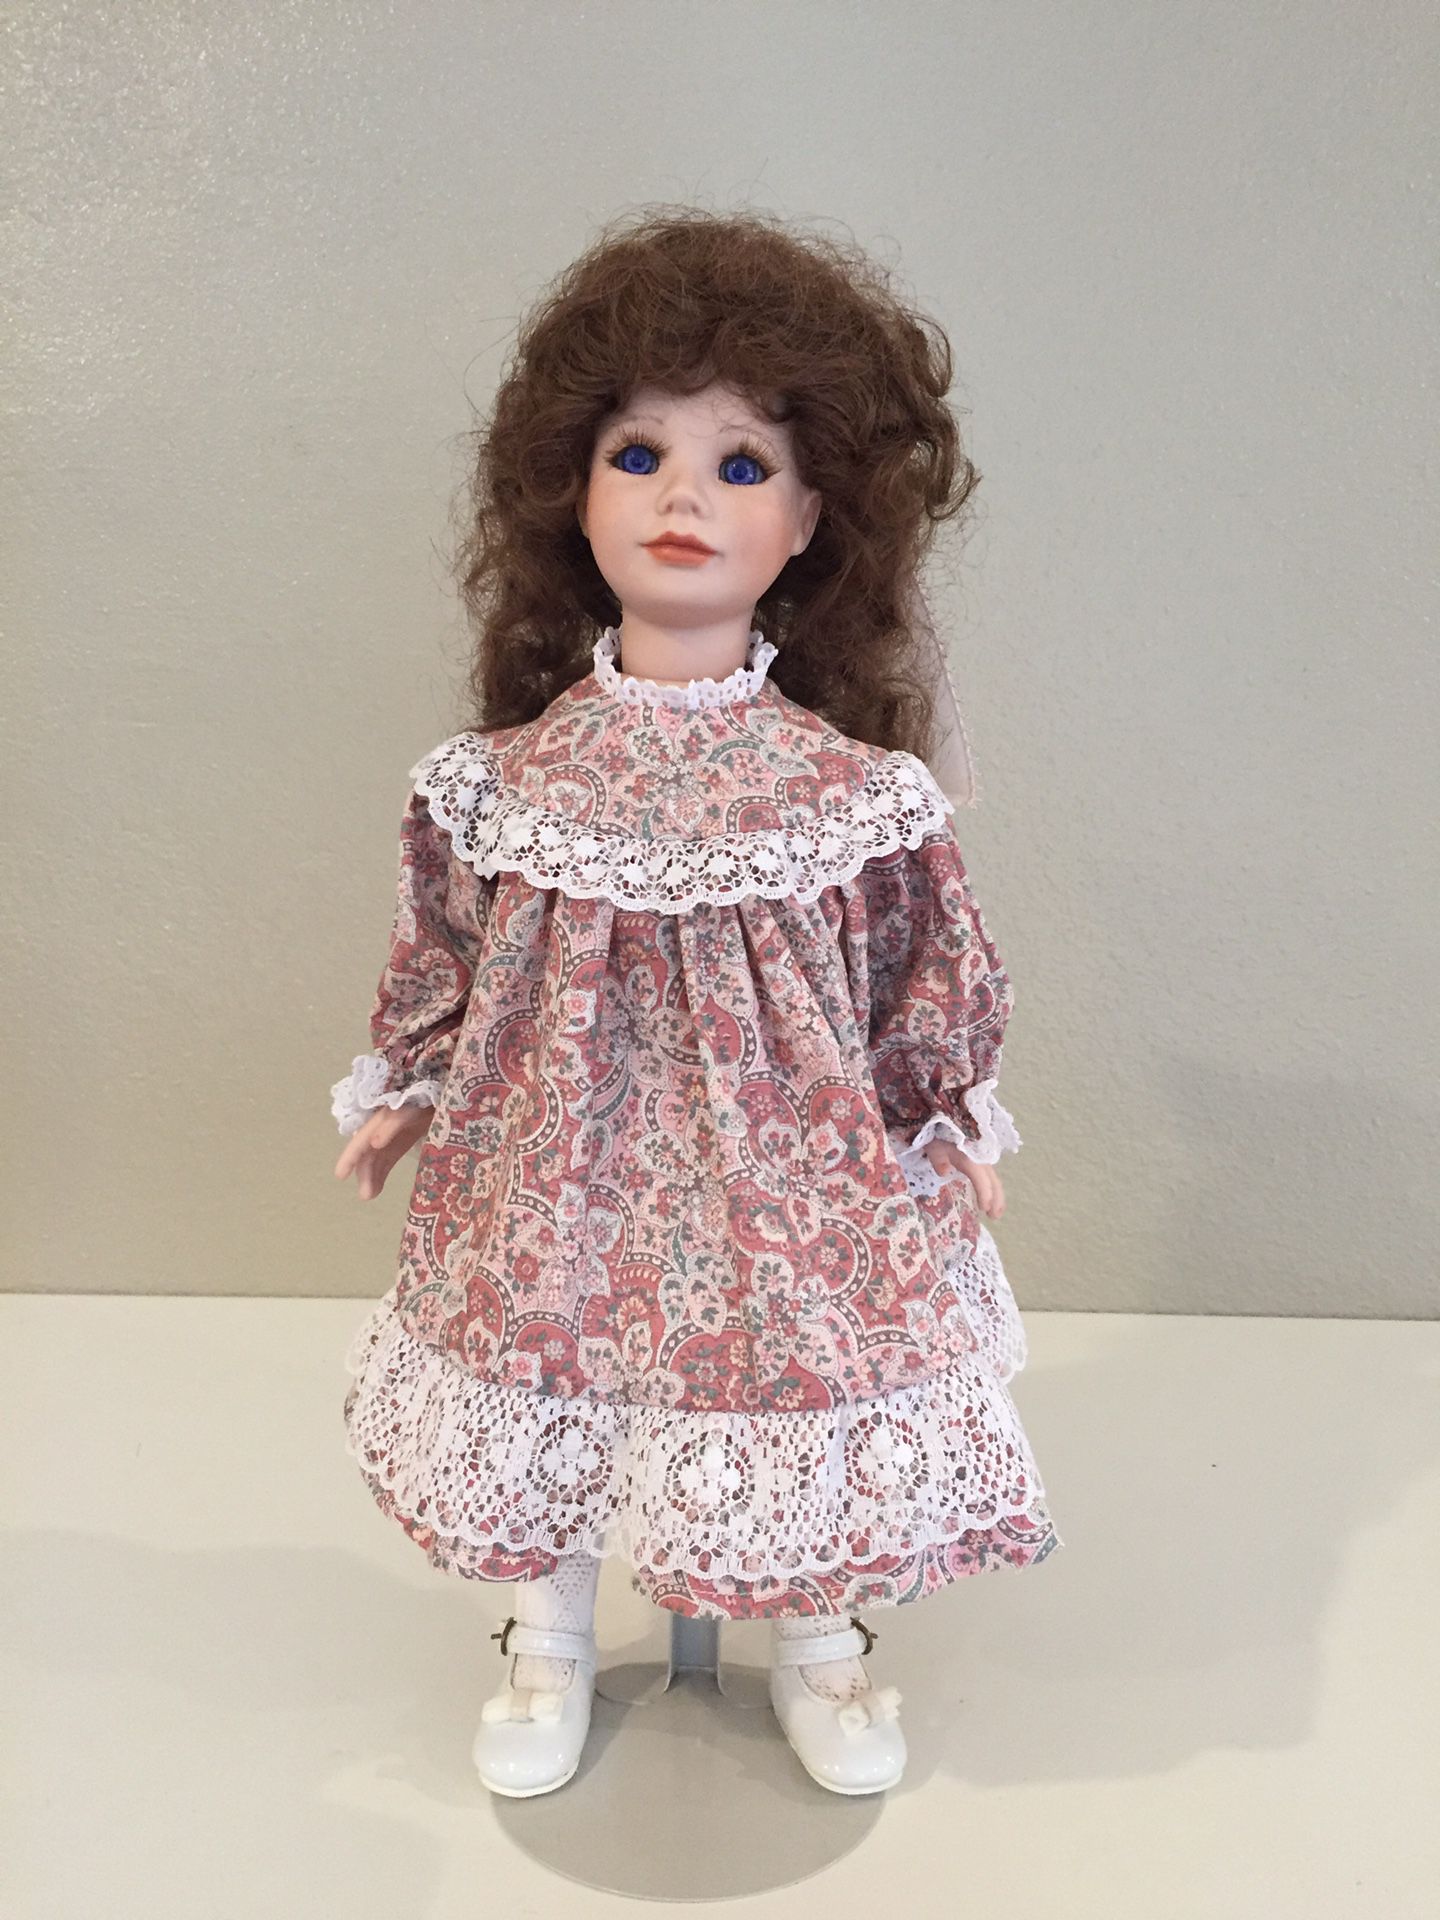 Vintage 17in Porcelain Doll The Prestige Collection Brown Curly Hair Blue Eyes